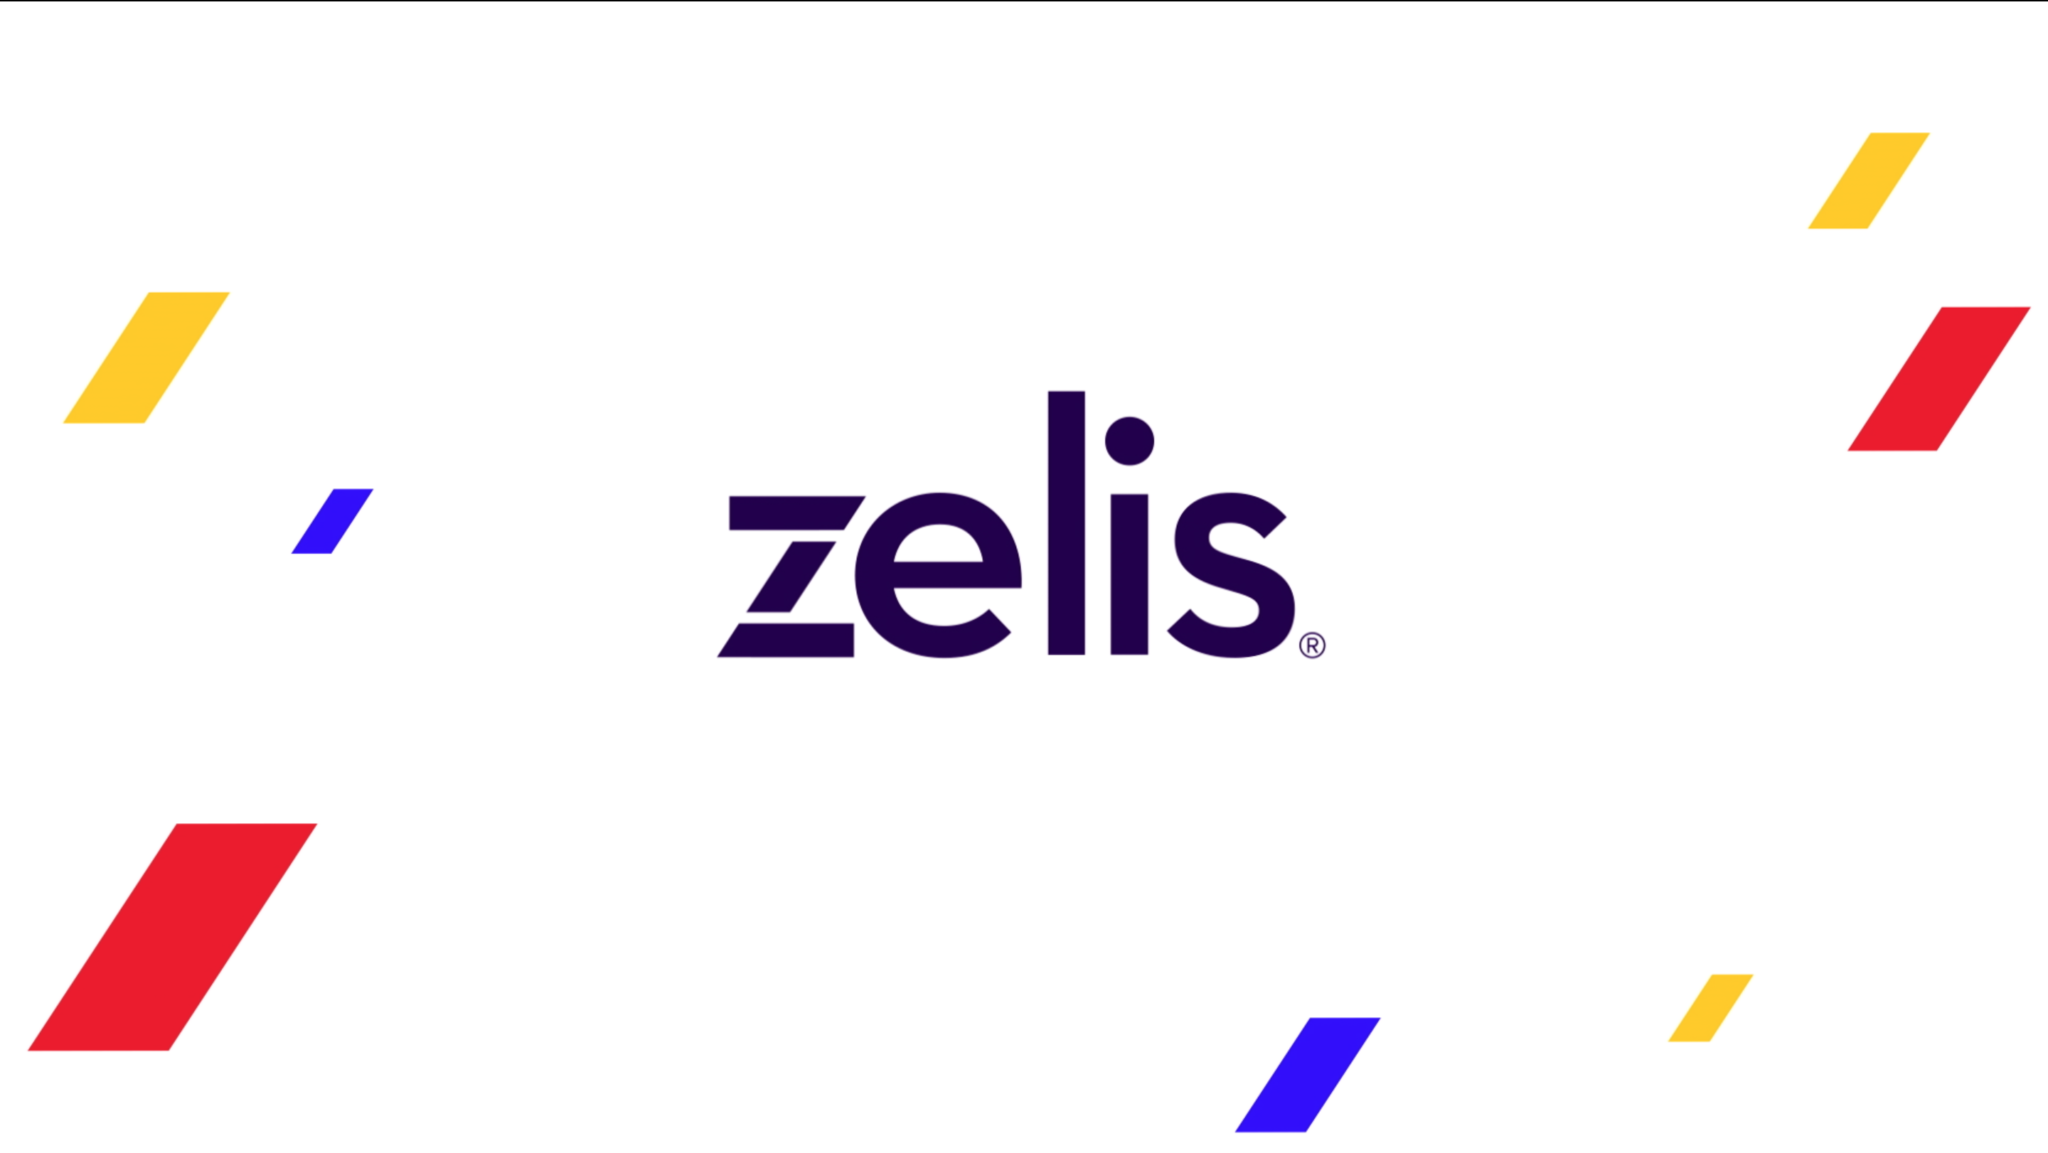 Zelis Modernizing the Healthcare Financial Experience for All